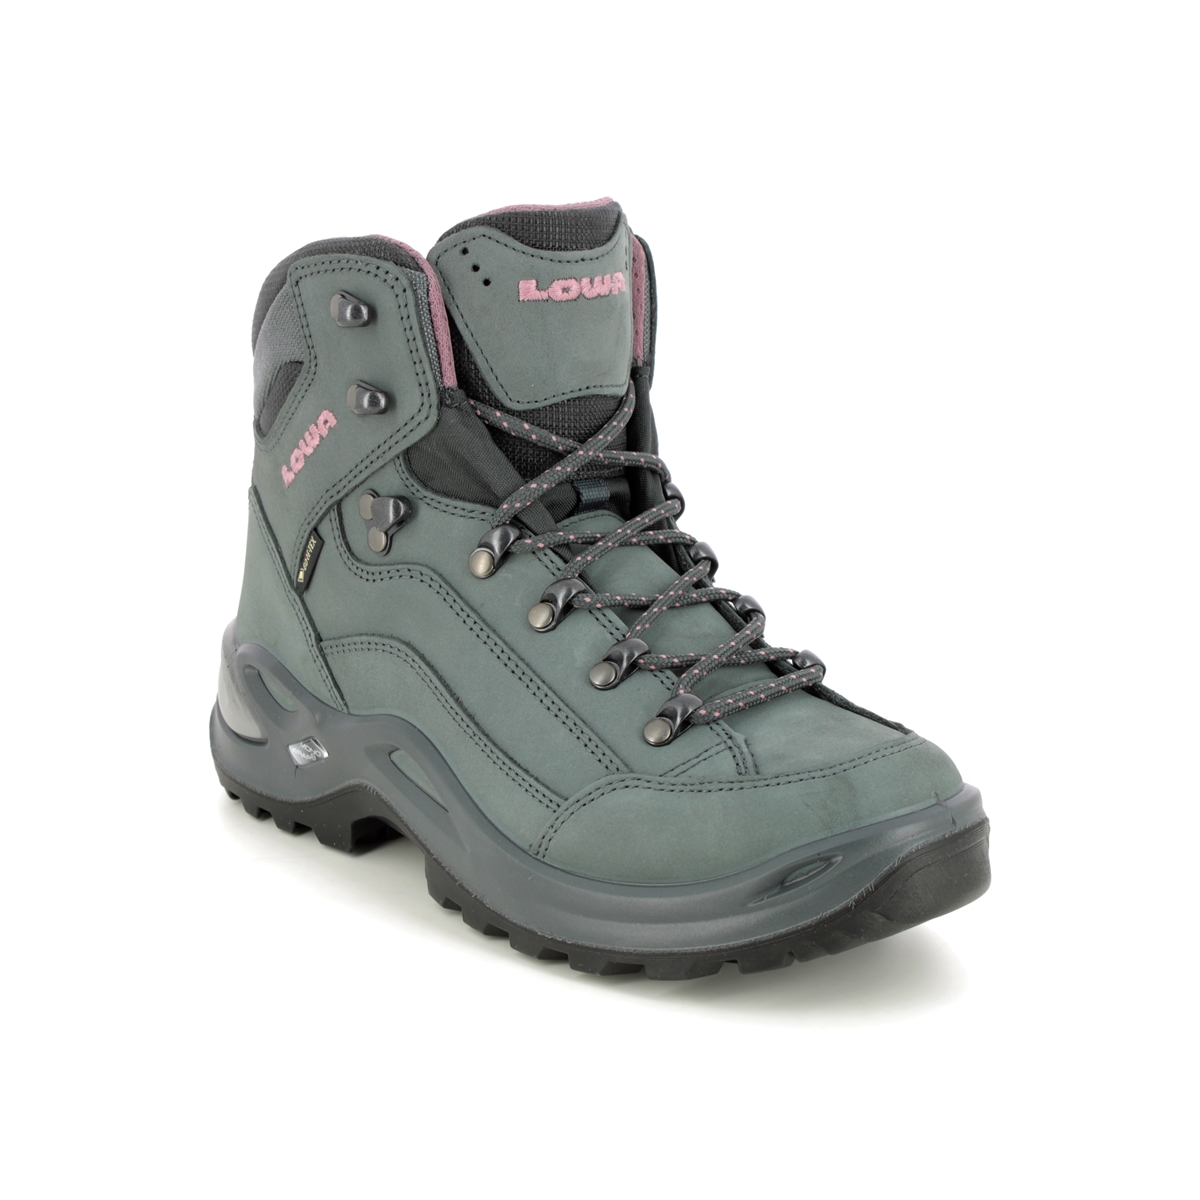 Lowa Renegade Gtx Womens Charcoal Womens walking boots 320945-9789 in a Plain Leather and Man-made in Size 5.5